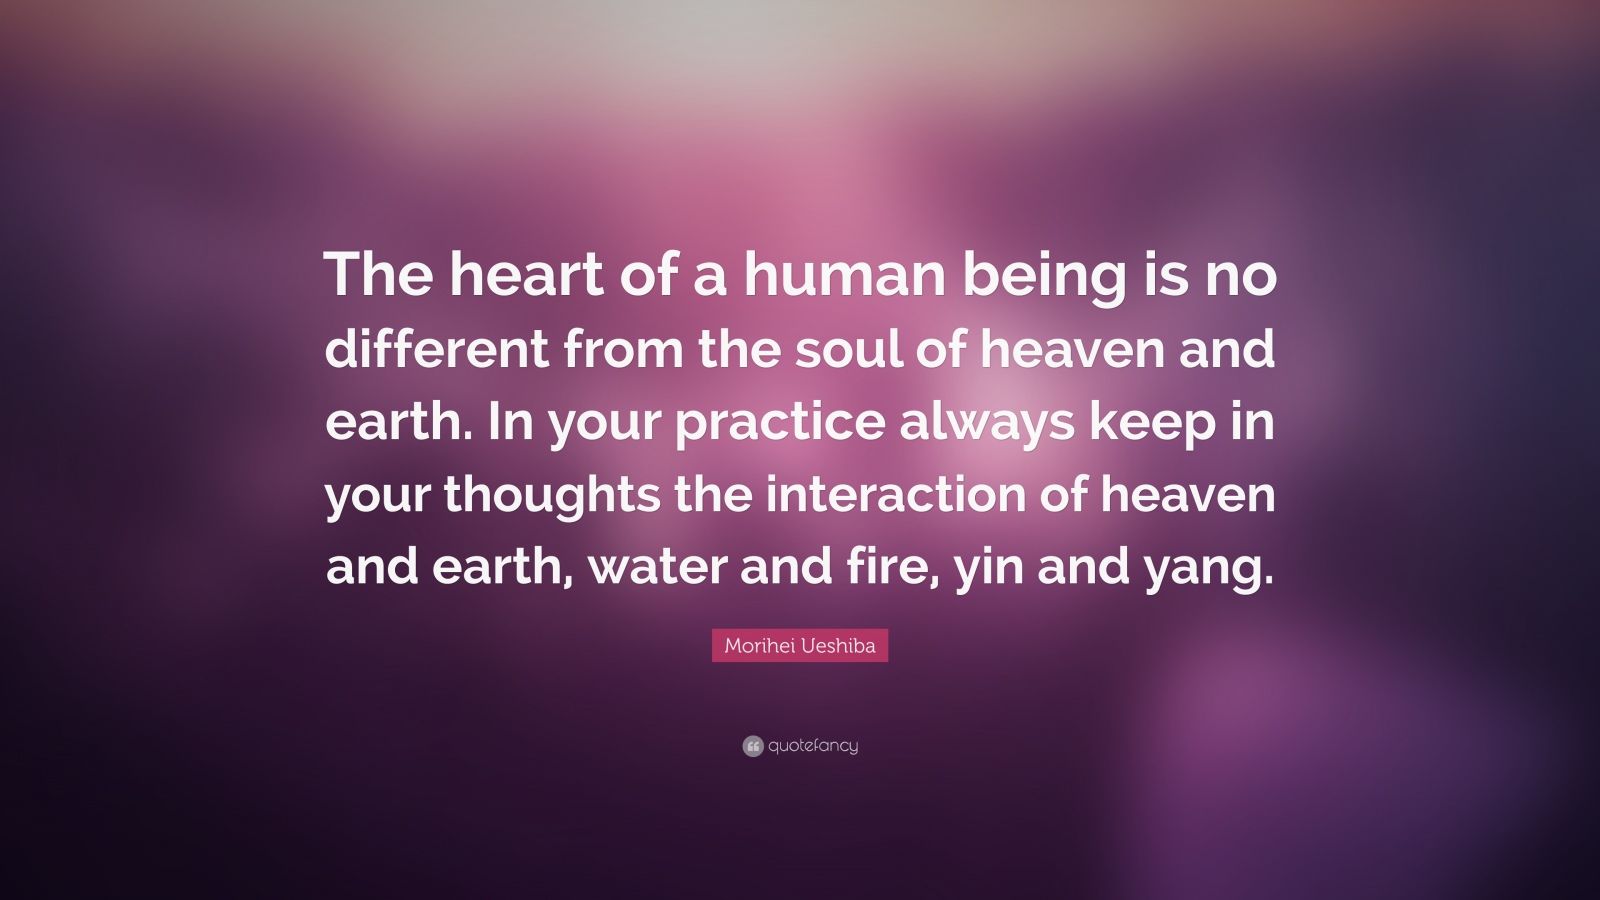 763695-Morihei-Ueshiba-Quote-The-heart-of-a-human-being-is-no-different.jpg